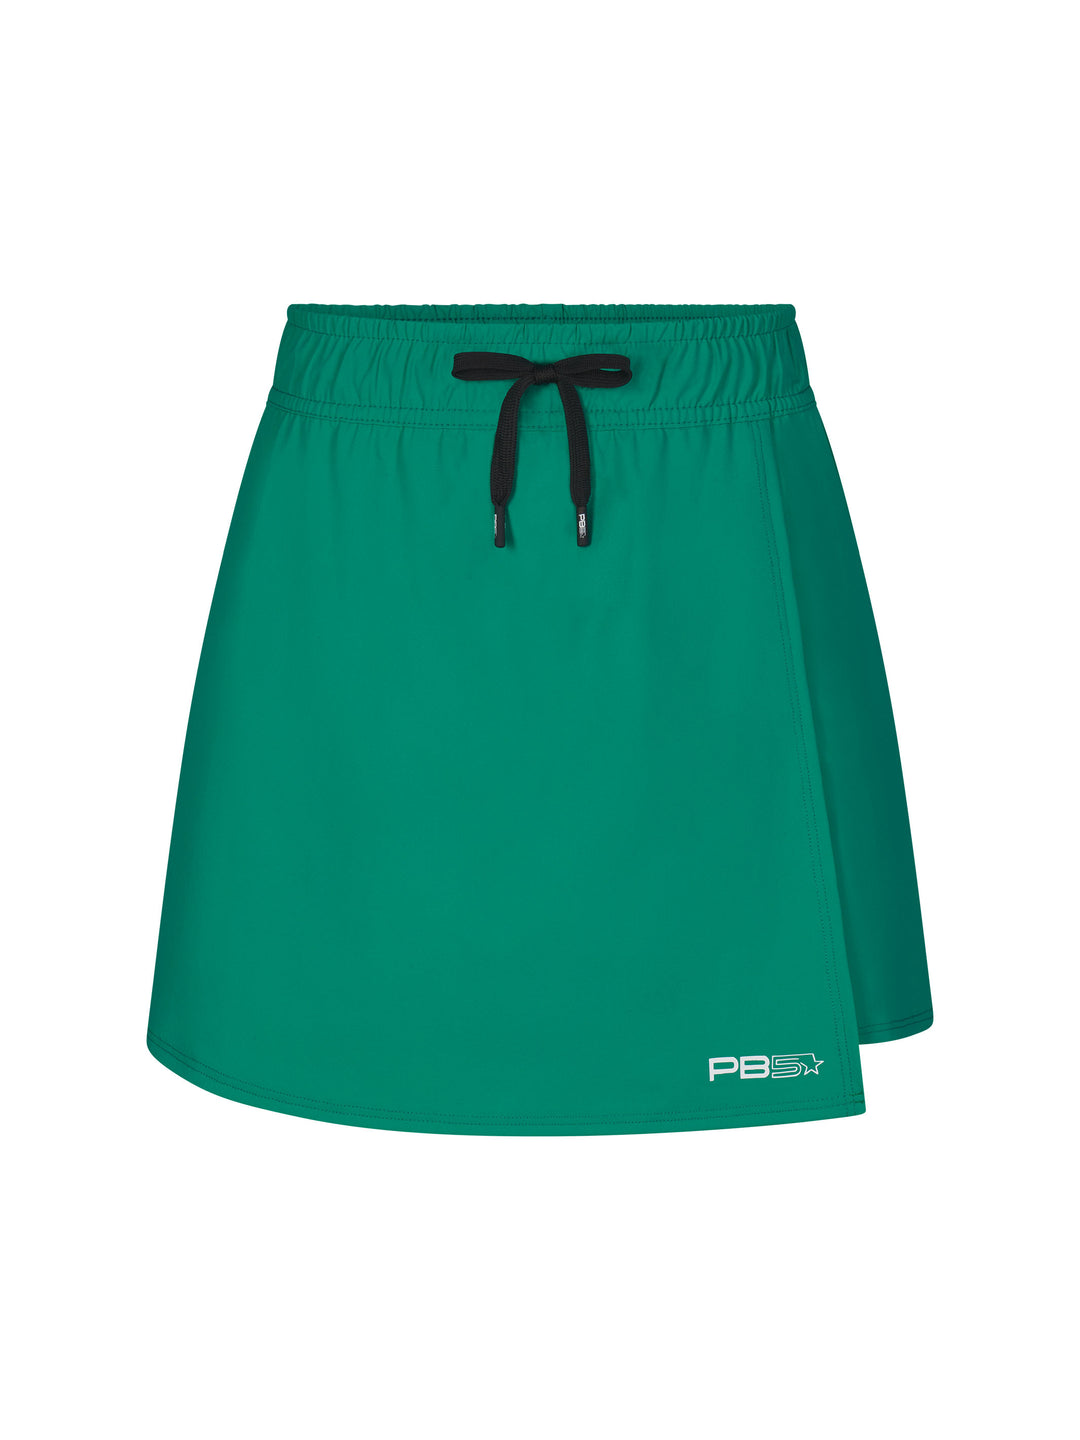 Women's Lightweight Wrap skirt front view in jade with black drawstring. Small Logo on lower left hem.